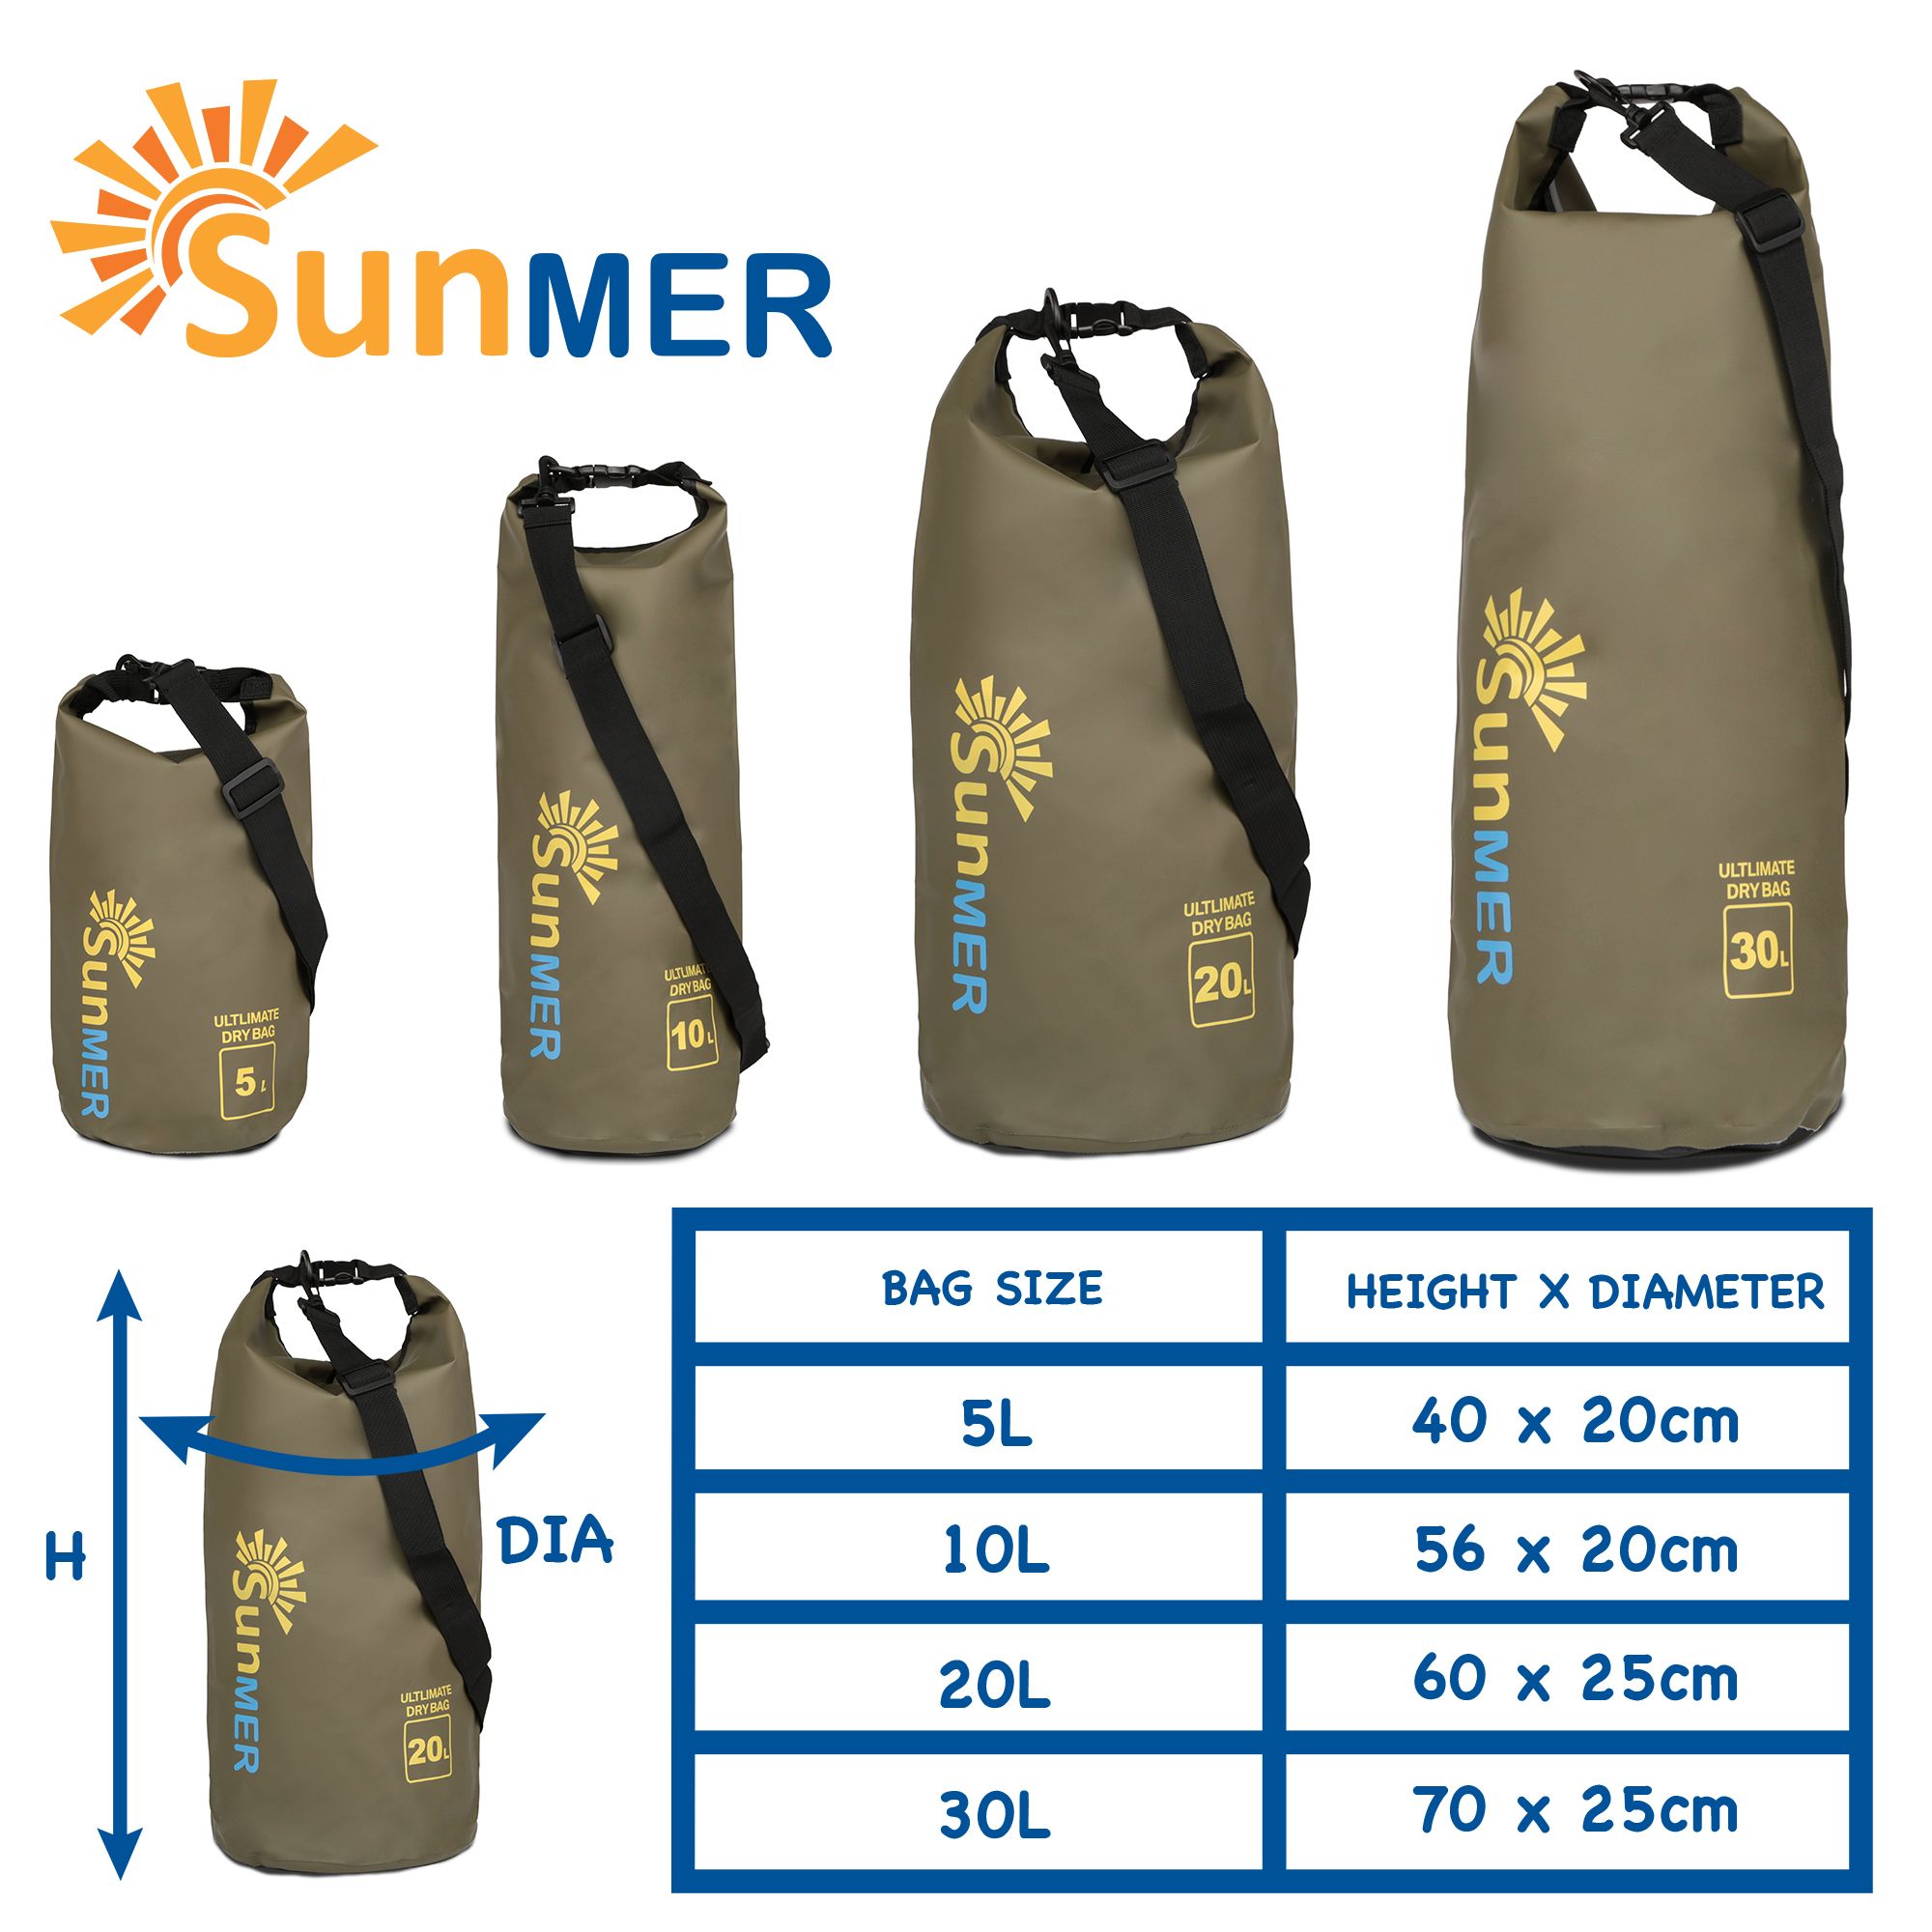 SUNMER 30L Dry Bag With Waterproof Phone Case - Army Green